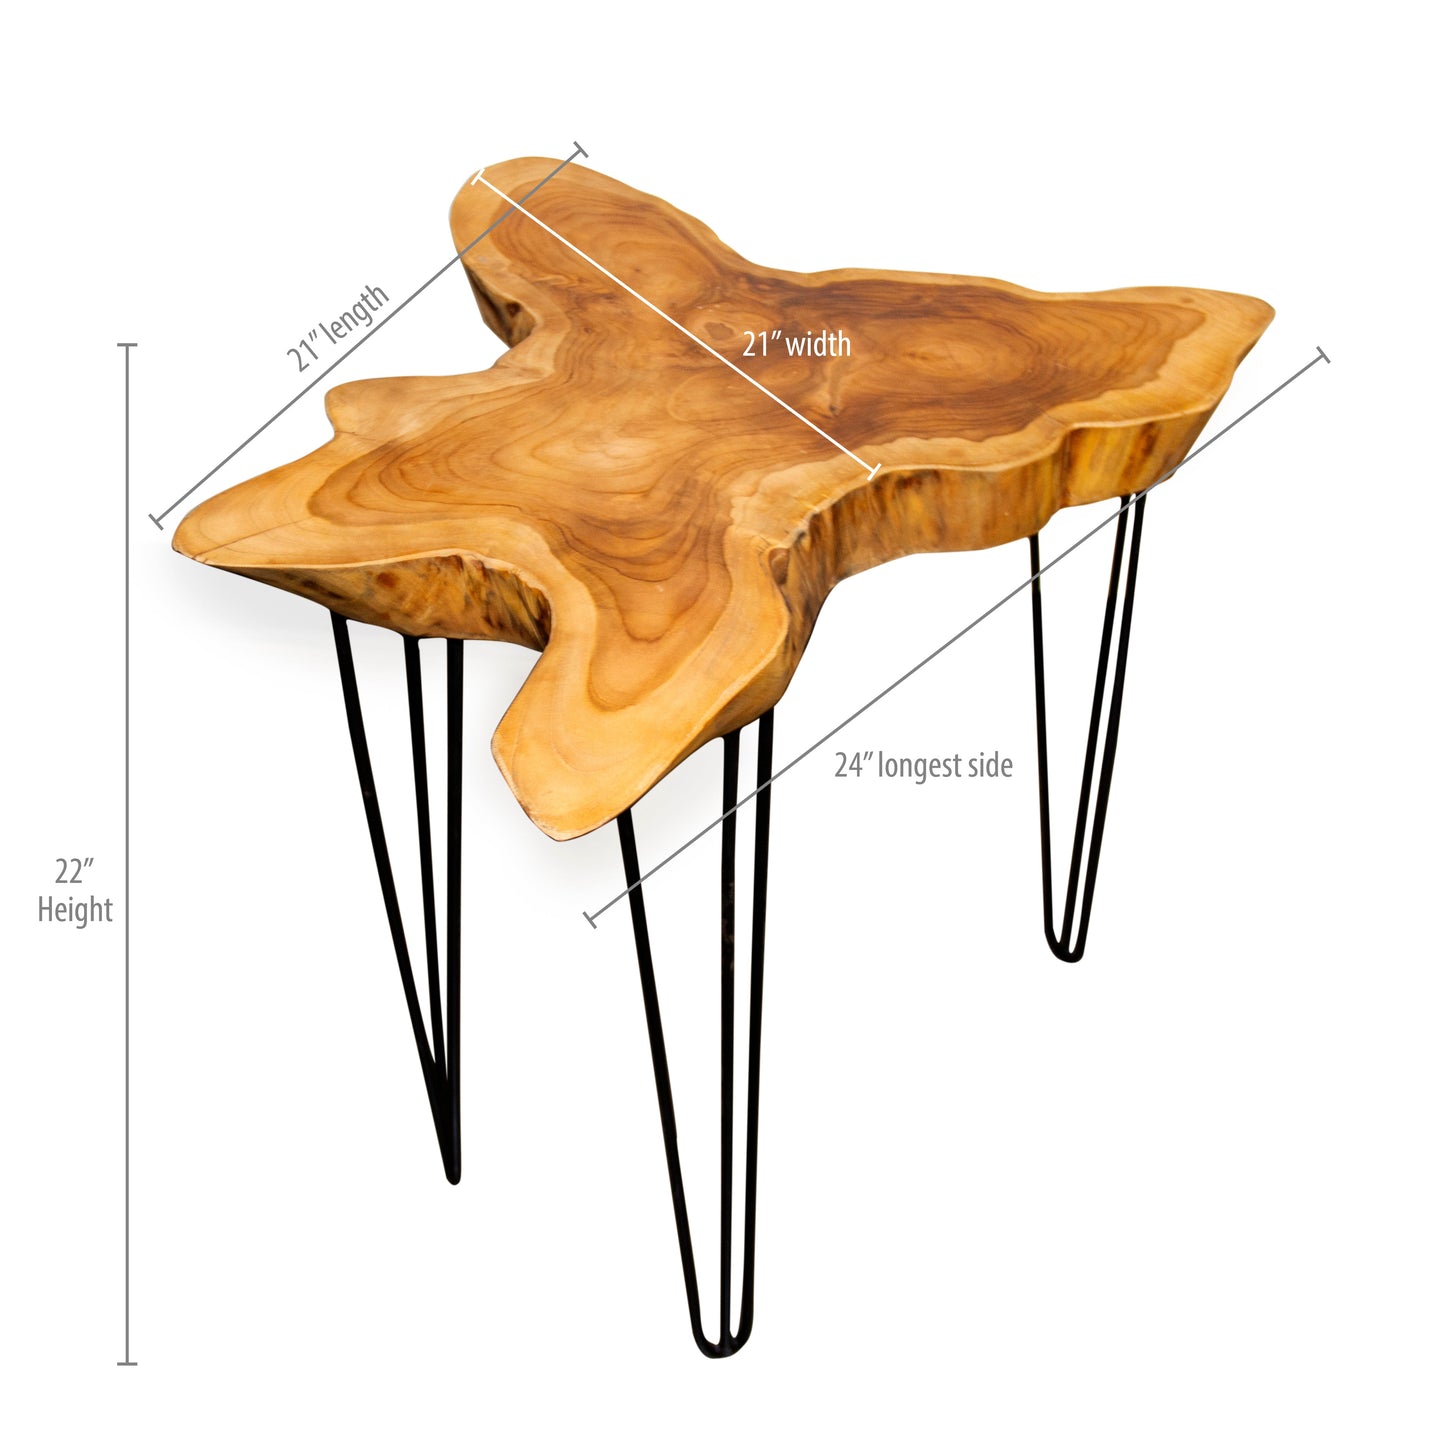 Teak Wood Organic Slab Accent Table by Andaluca Home